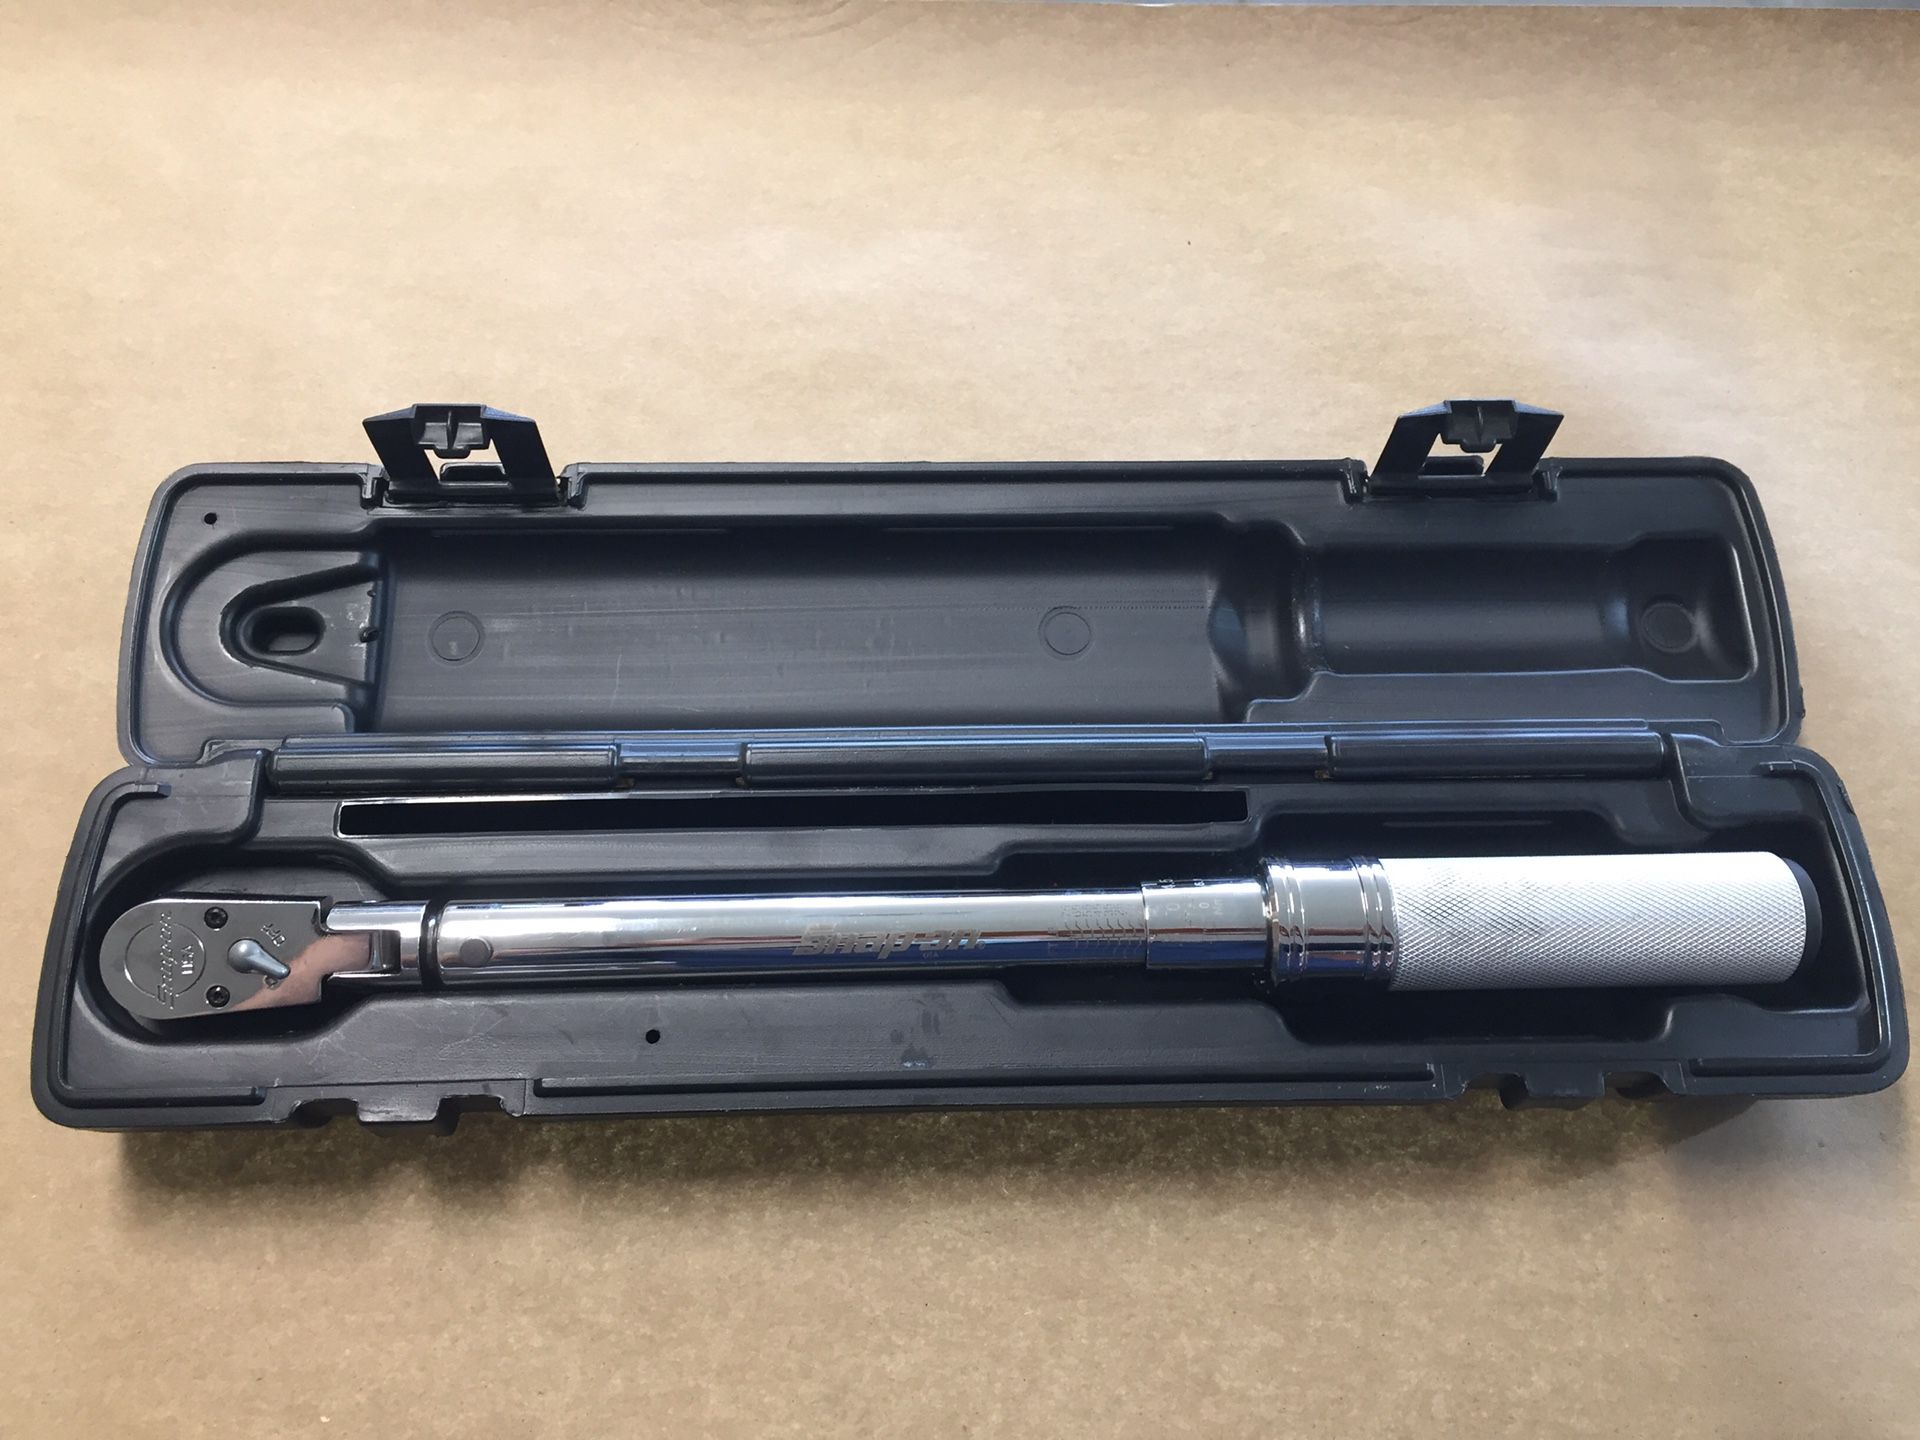 Snap On 3/8” Flex Head Torque Wrench $270 tax Included